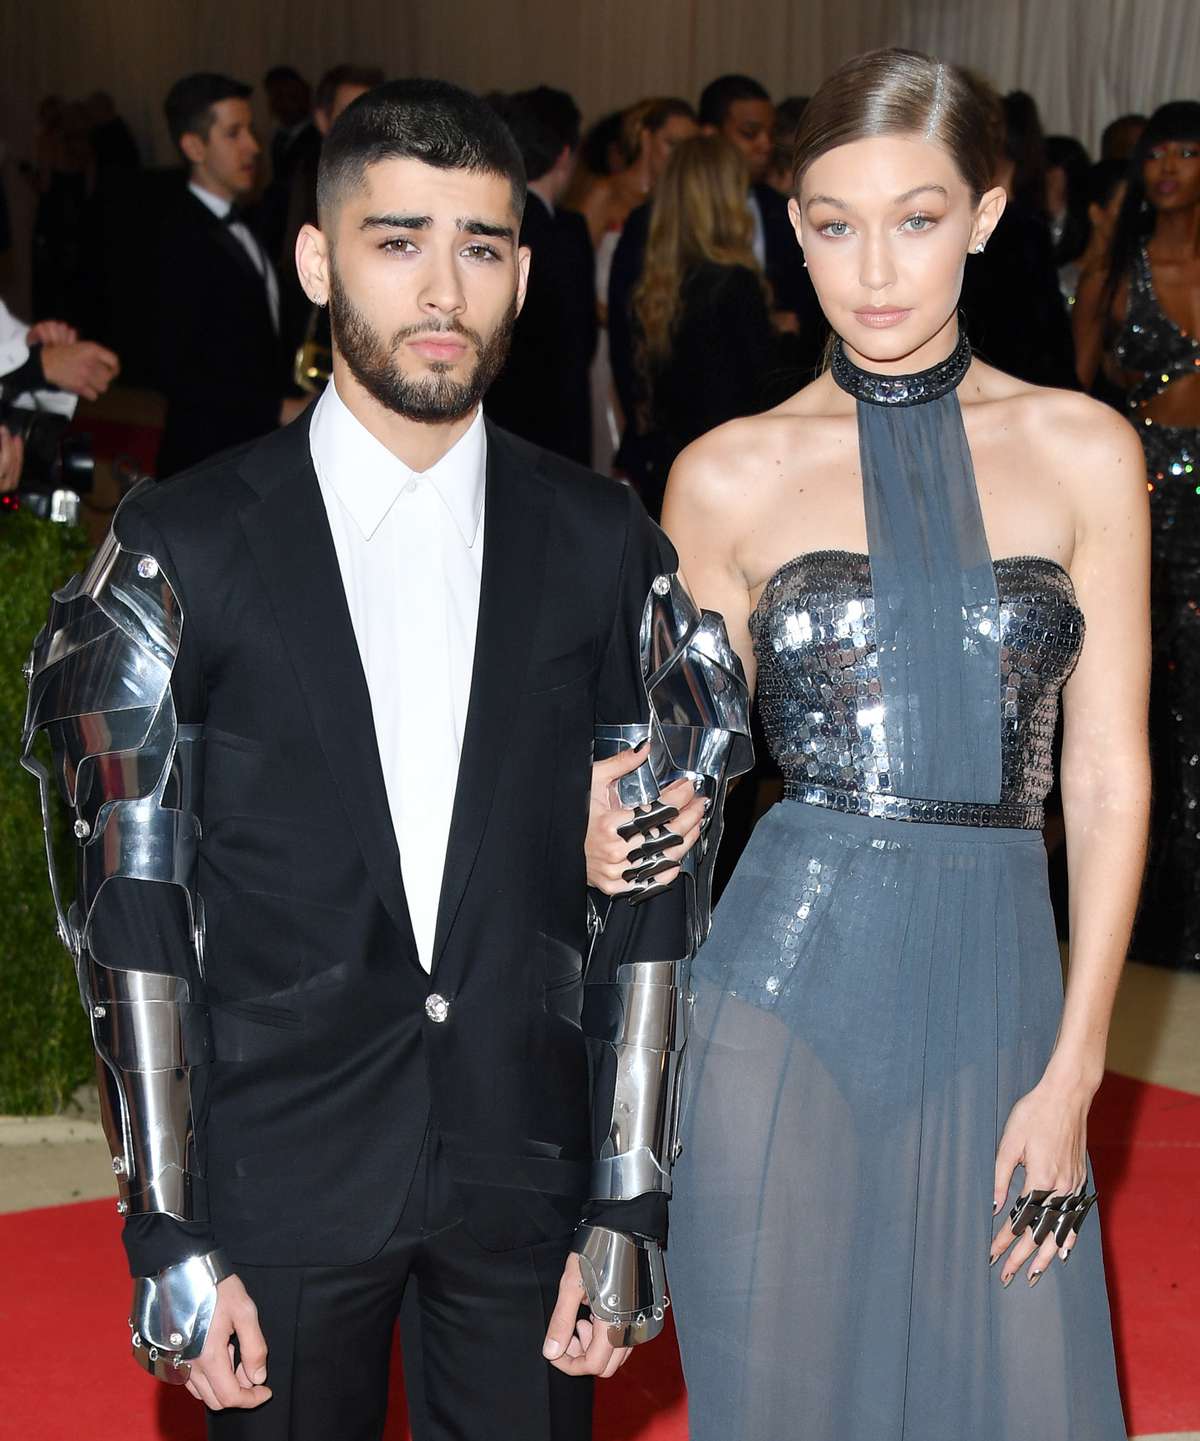 Zayn Malik and Gigi Hadid attend the 'Manus x Machina: Fashion in an Age of Technology' Costume Institute Gala at the Metropolitan Museum of Art on May 2, 2016 in New York City.